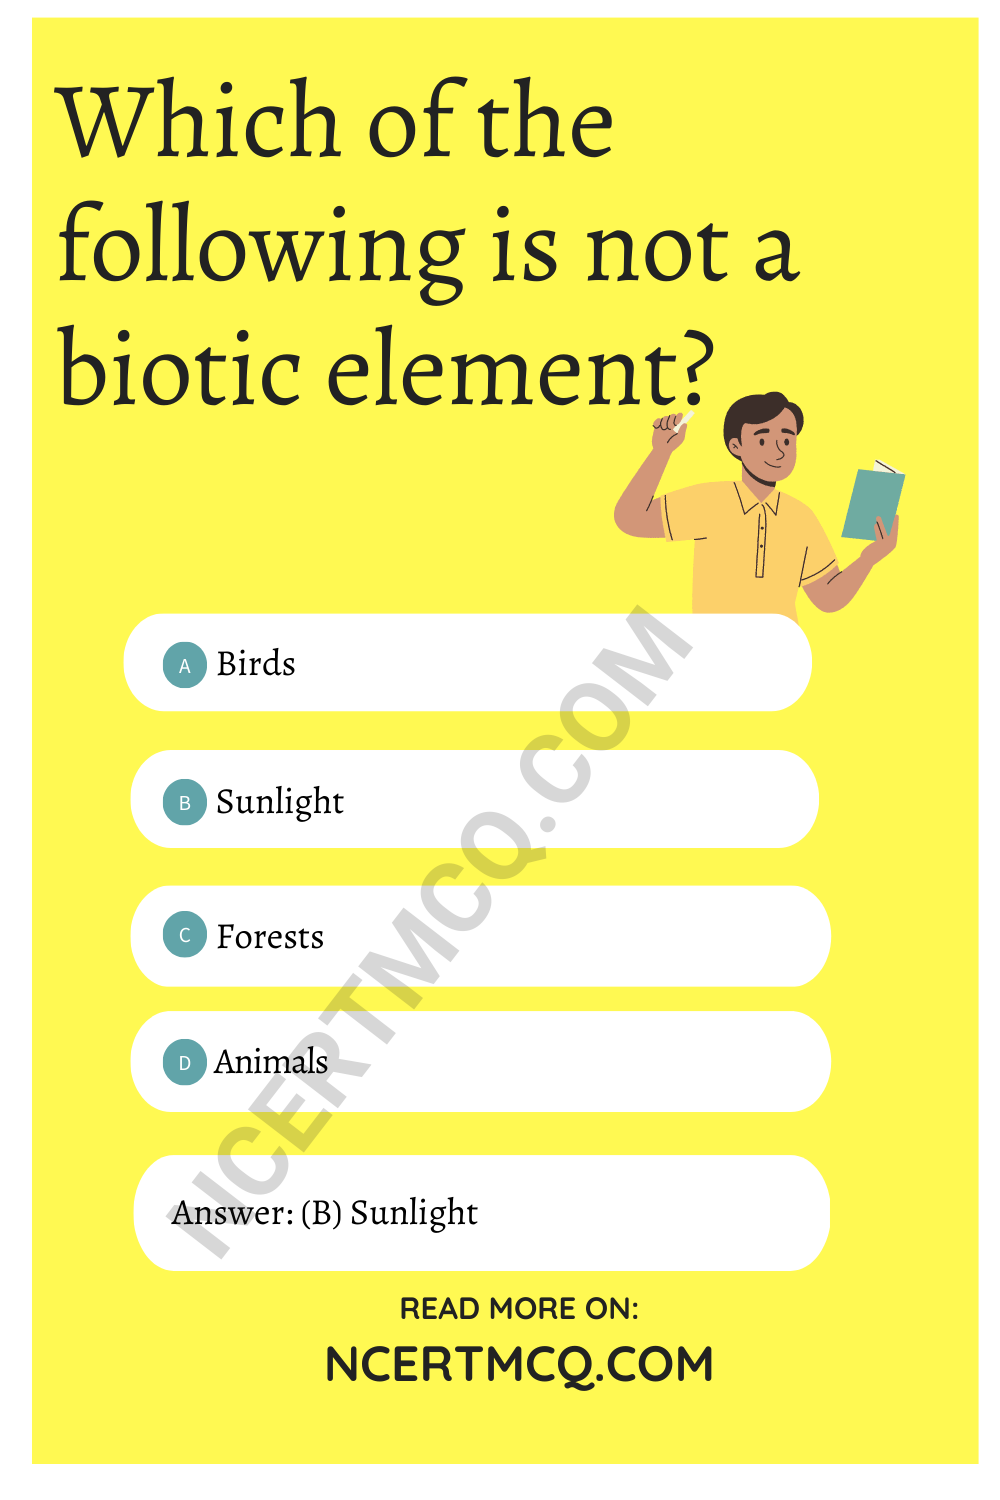 Which of the following is not a biotic element?